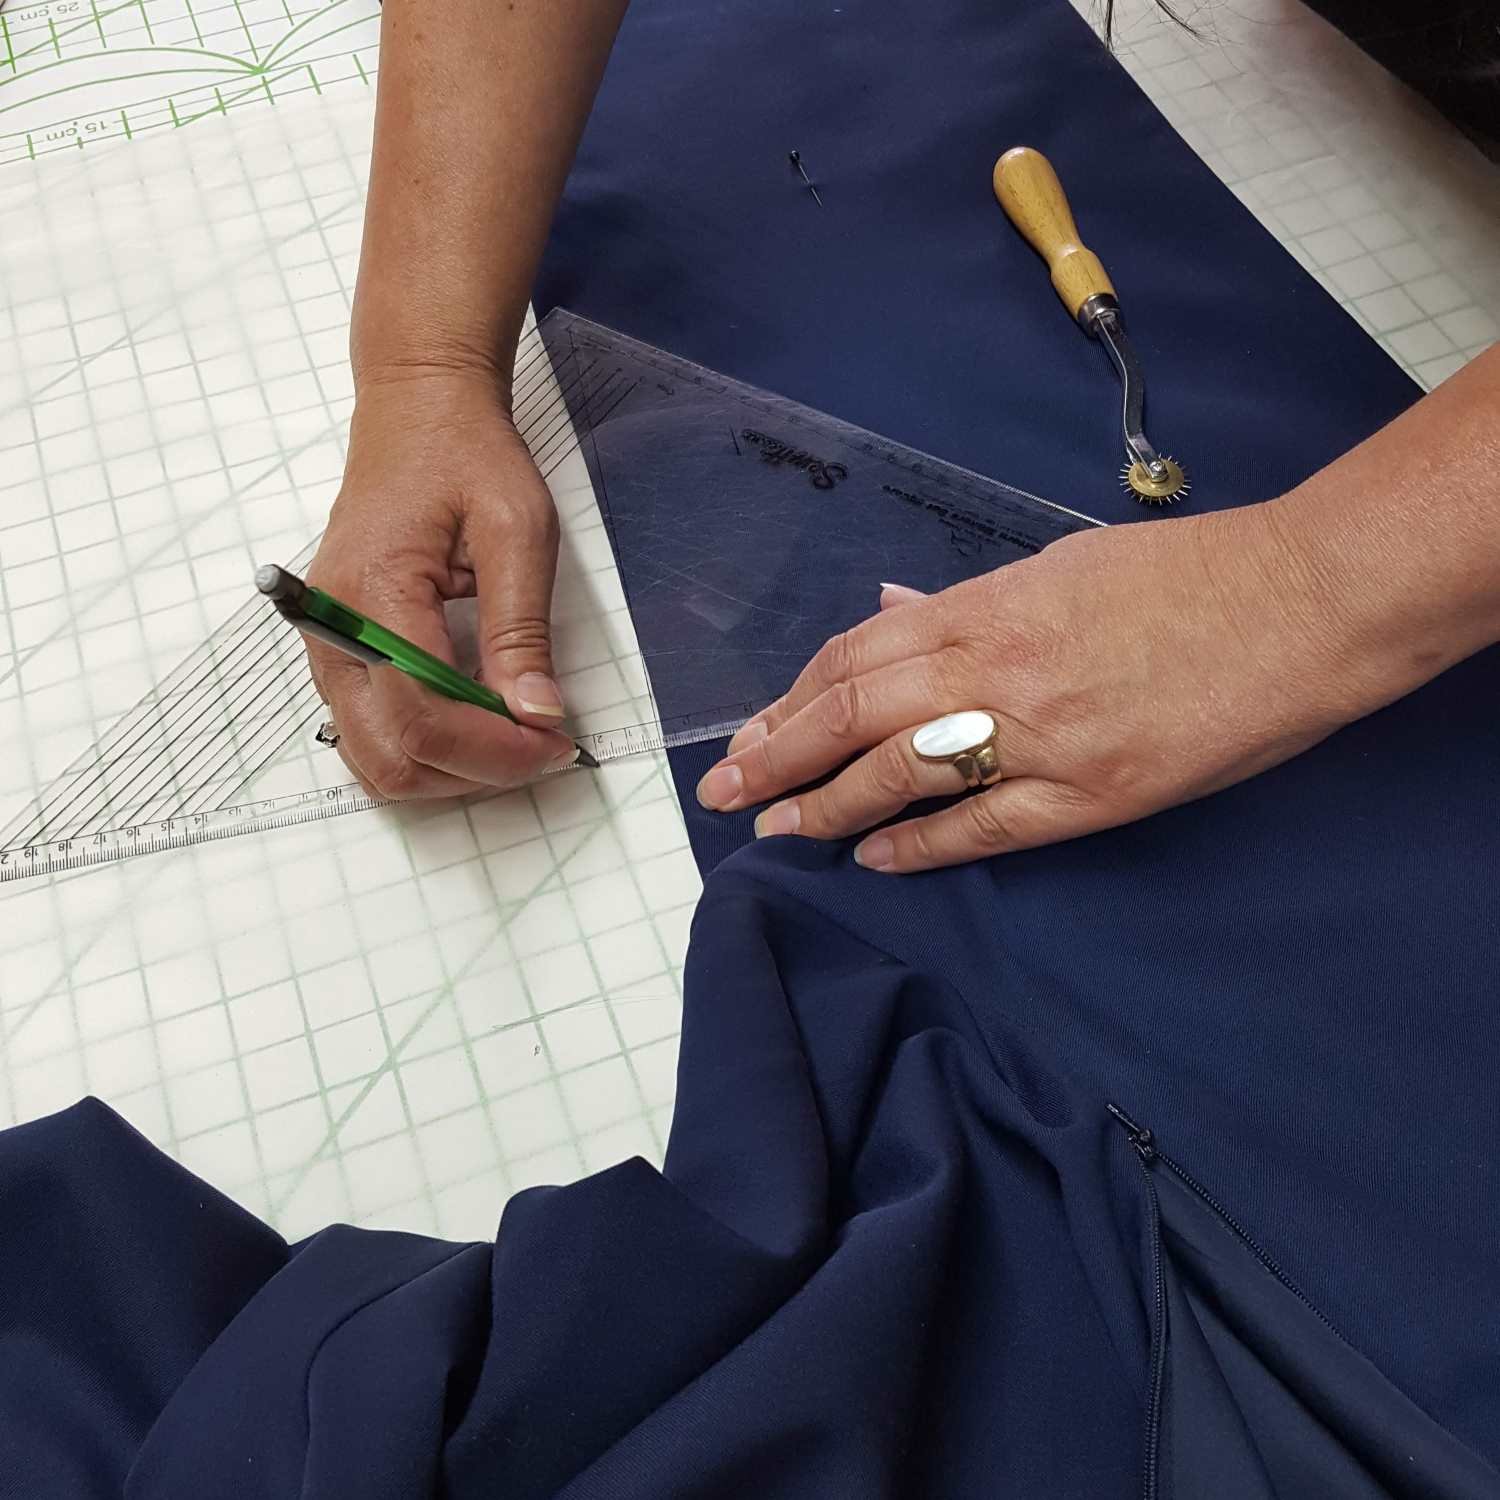 Tonight's the last chance for early bird registrations for our new Pattern Making class from wardrobe favourites course with Darlene, starting next Thursday! 

Just 2 places left!! 

This is our new Intermediate workshop to help you repeat and custom